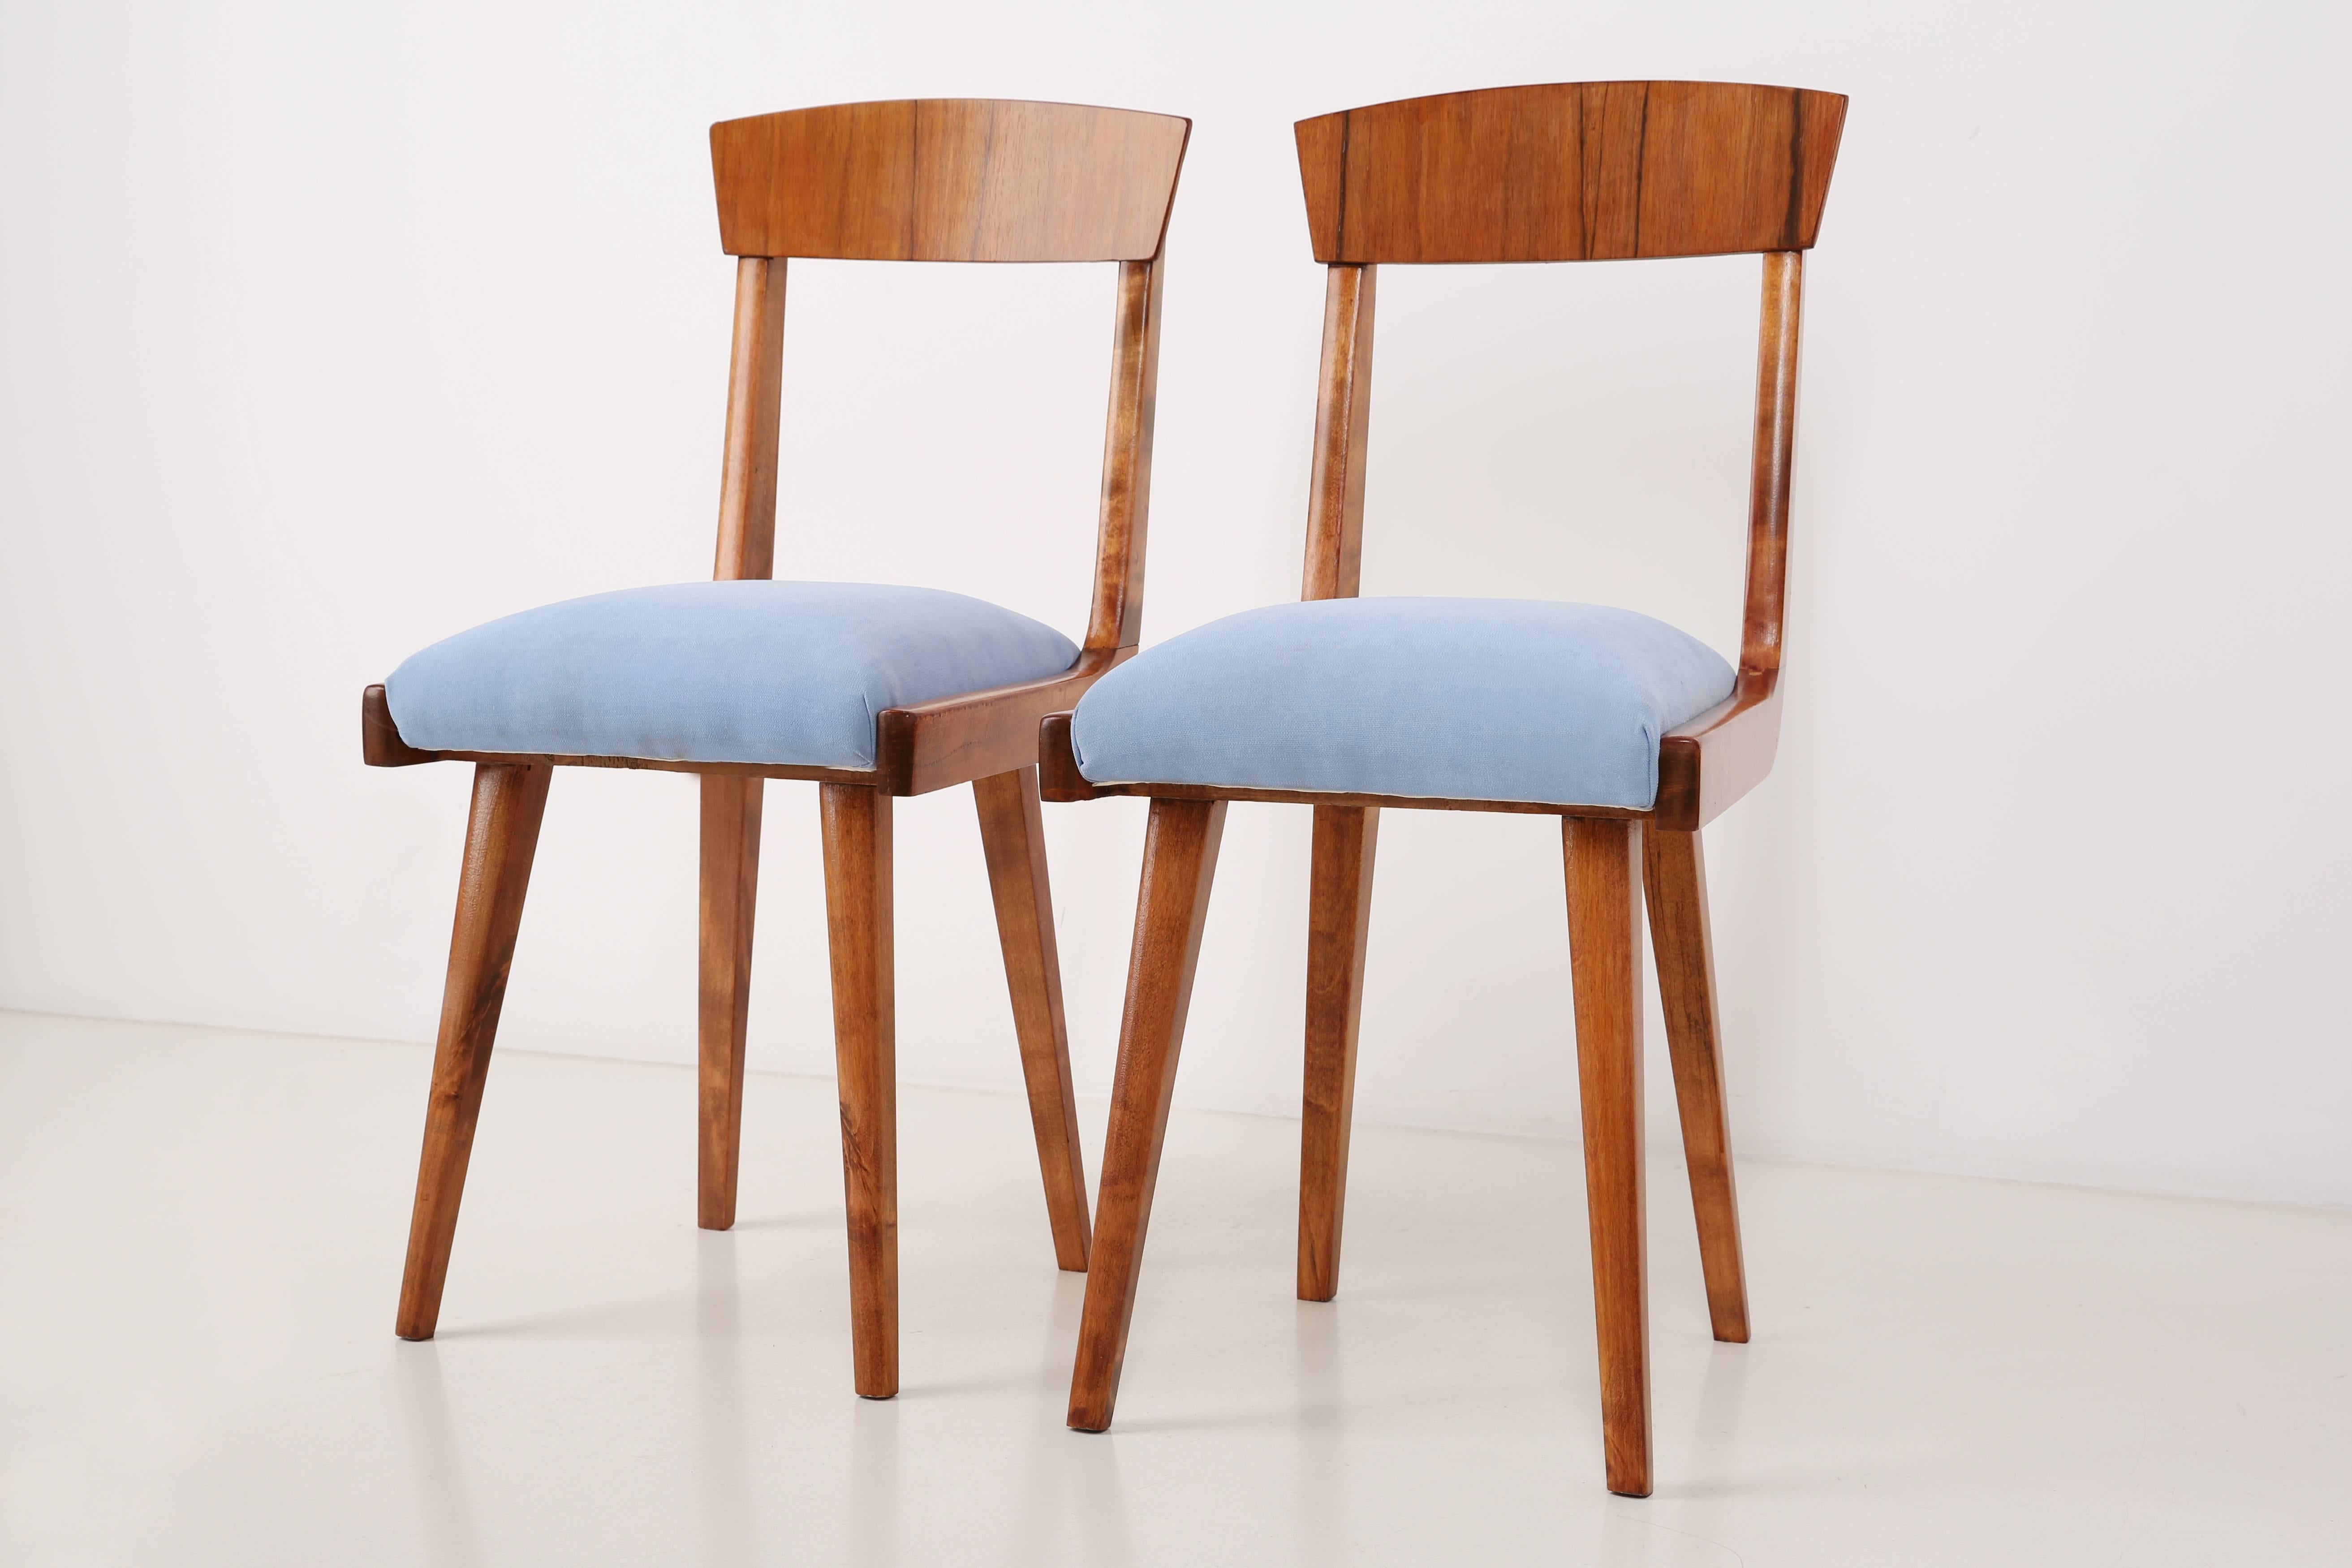 Chairs designed by prof. Rajmund Halas. They have been made of beechwood. They have undergone a complete upholstery renovation, the woodwork has been refreshed. Seats were dressed in light blue fabric. They are stable and very shapely. Chairs were